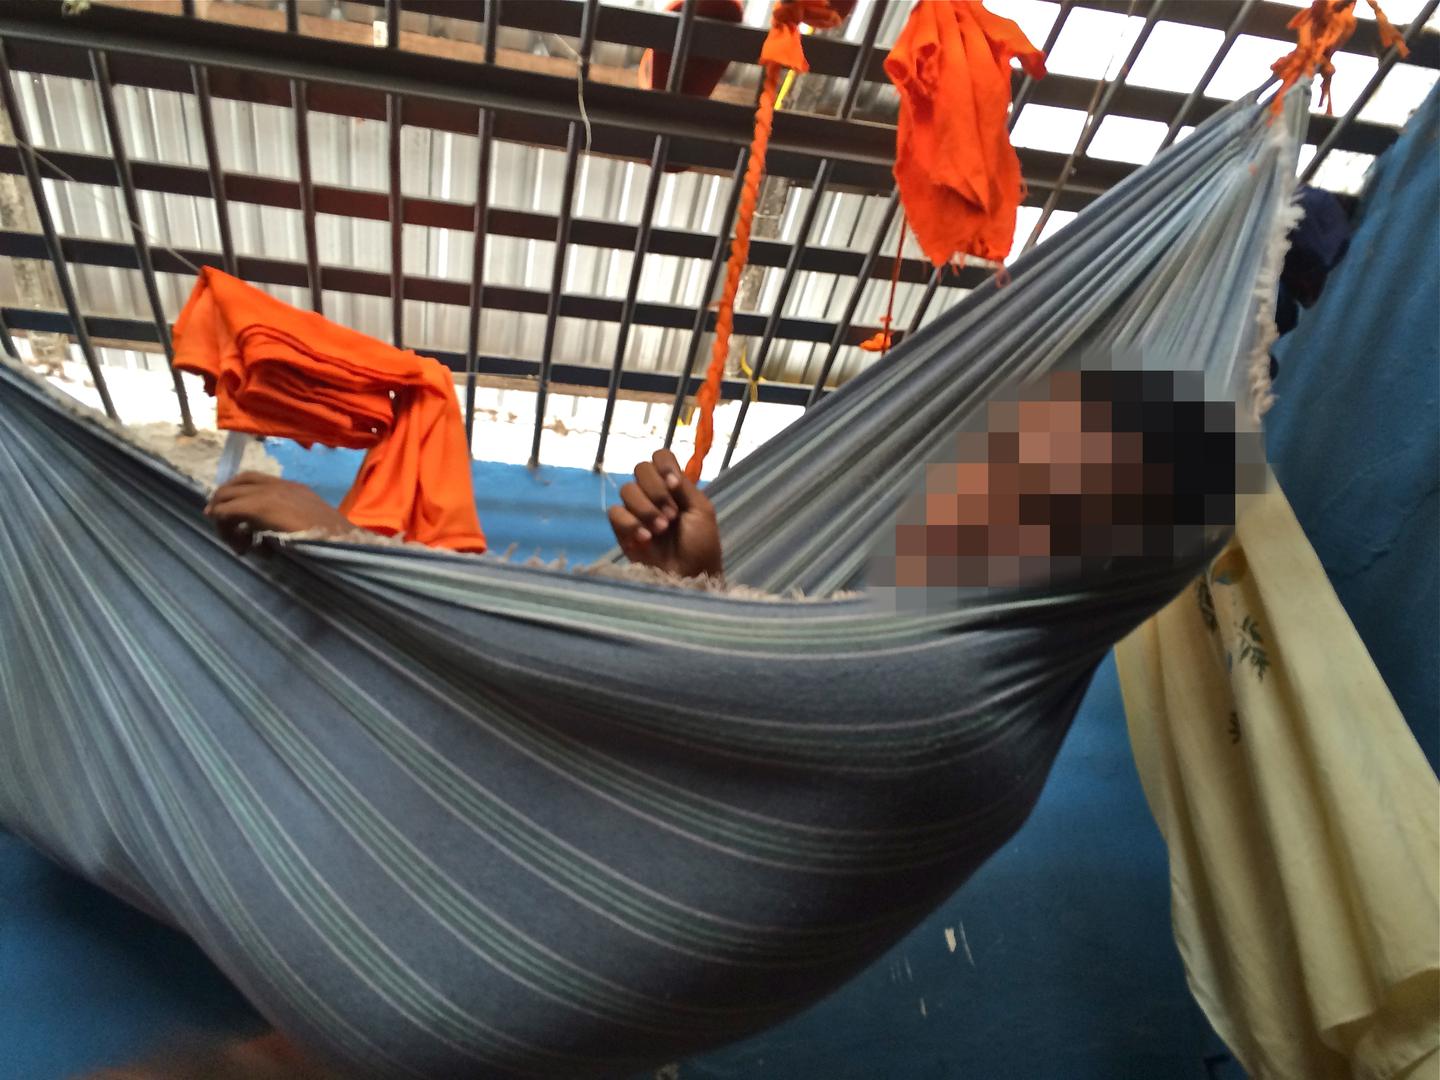 Some inmates sleep in hammocks in the Pedrinhas prison complex due to the lack of bunks, mattresses or even space on the floor to lie down. 